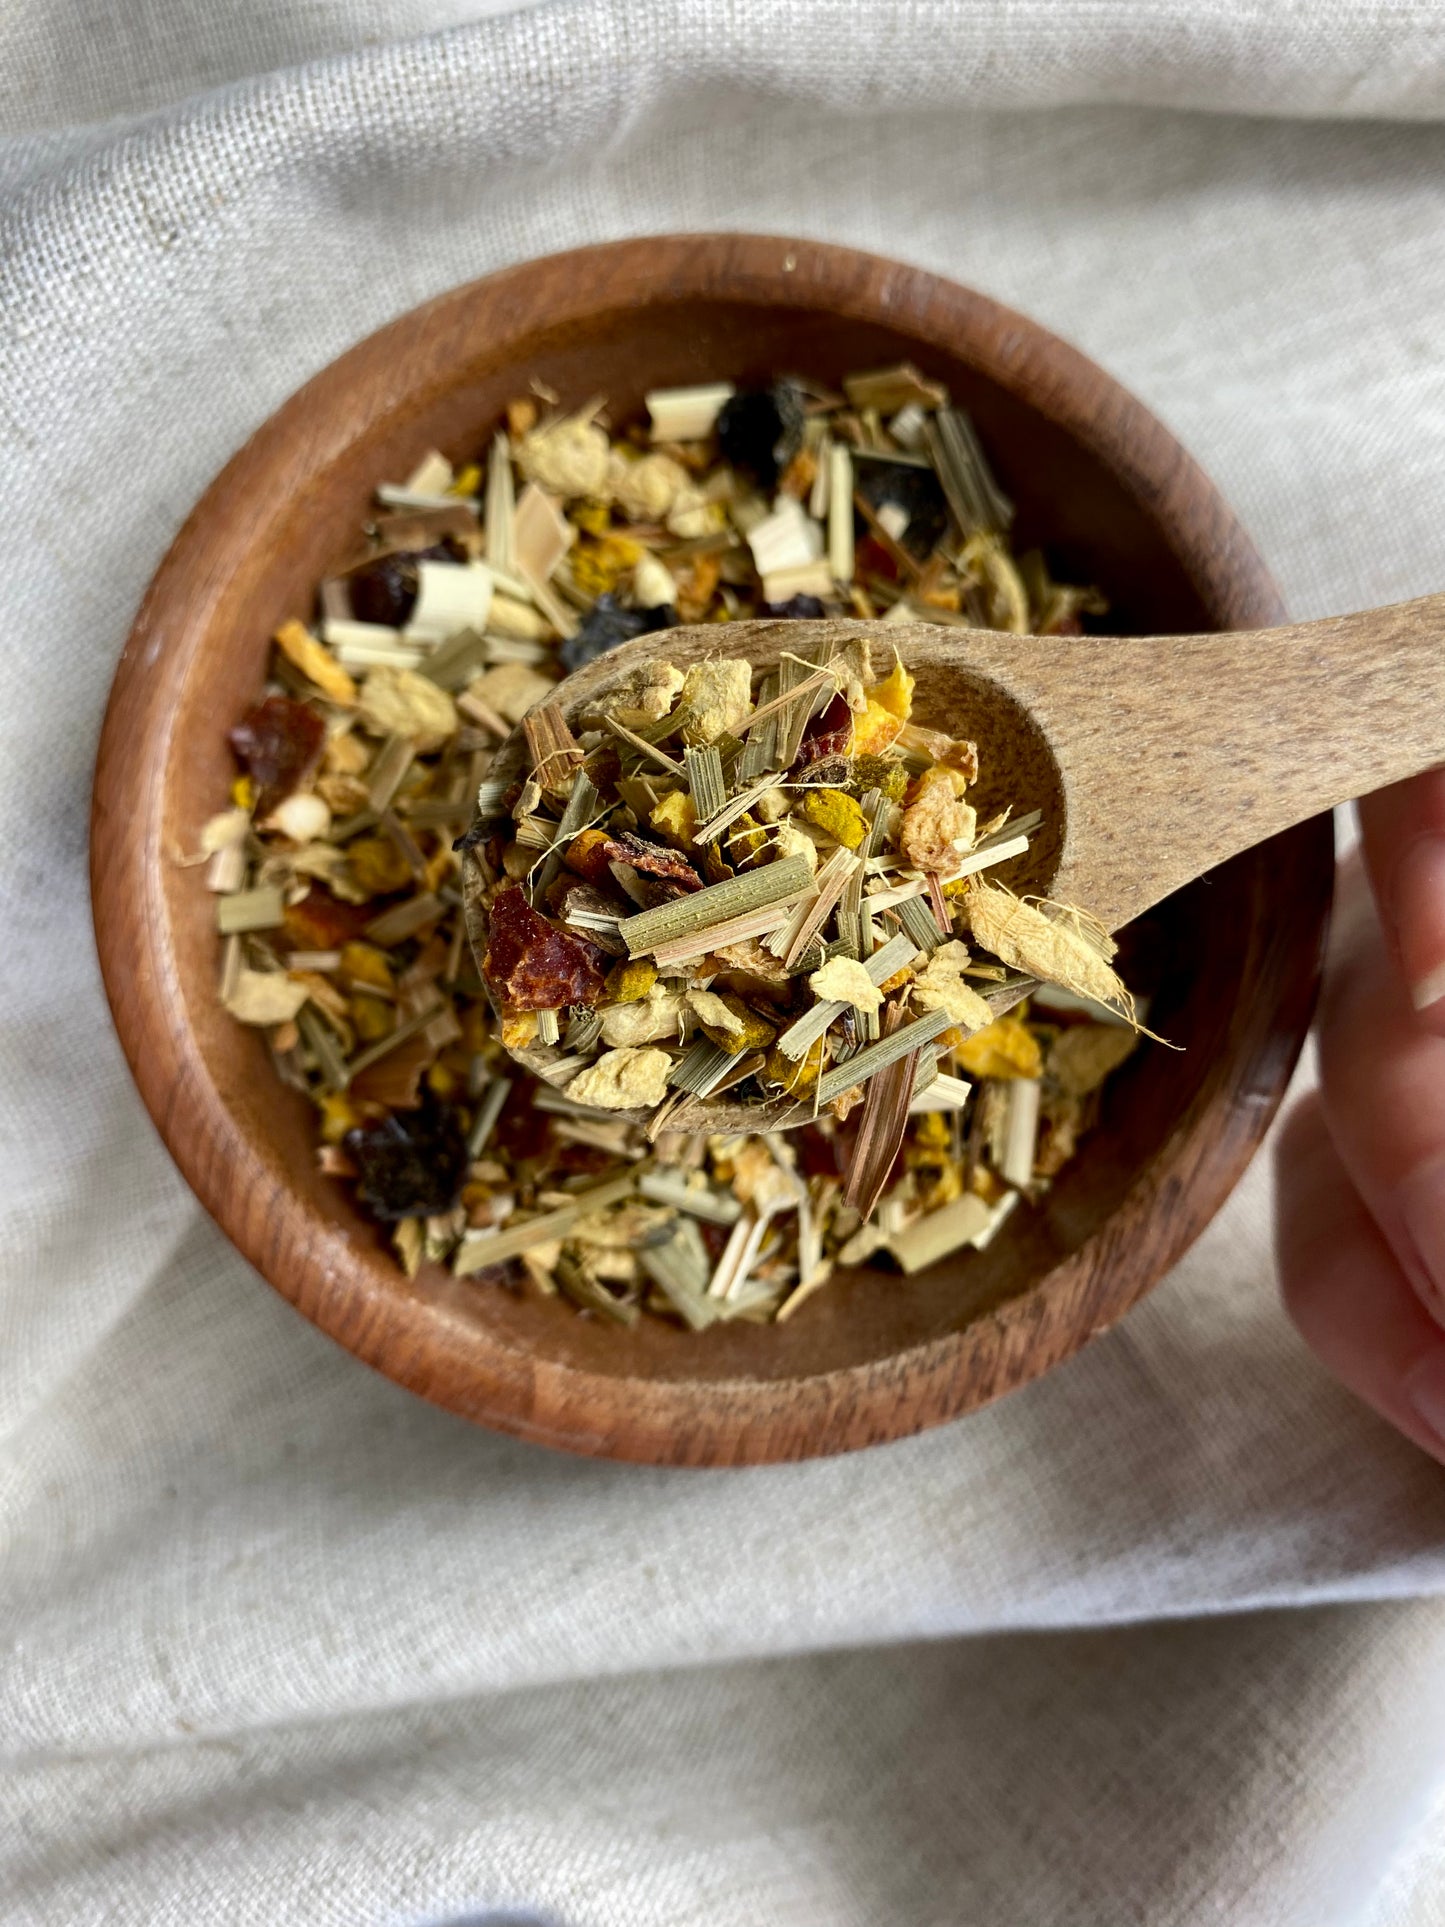 Spice of Life: Herbal Tea for Good Health